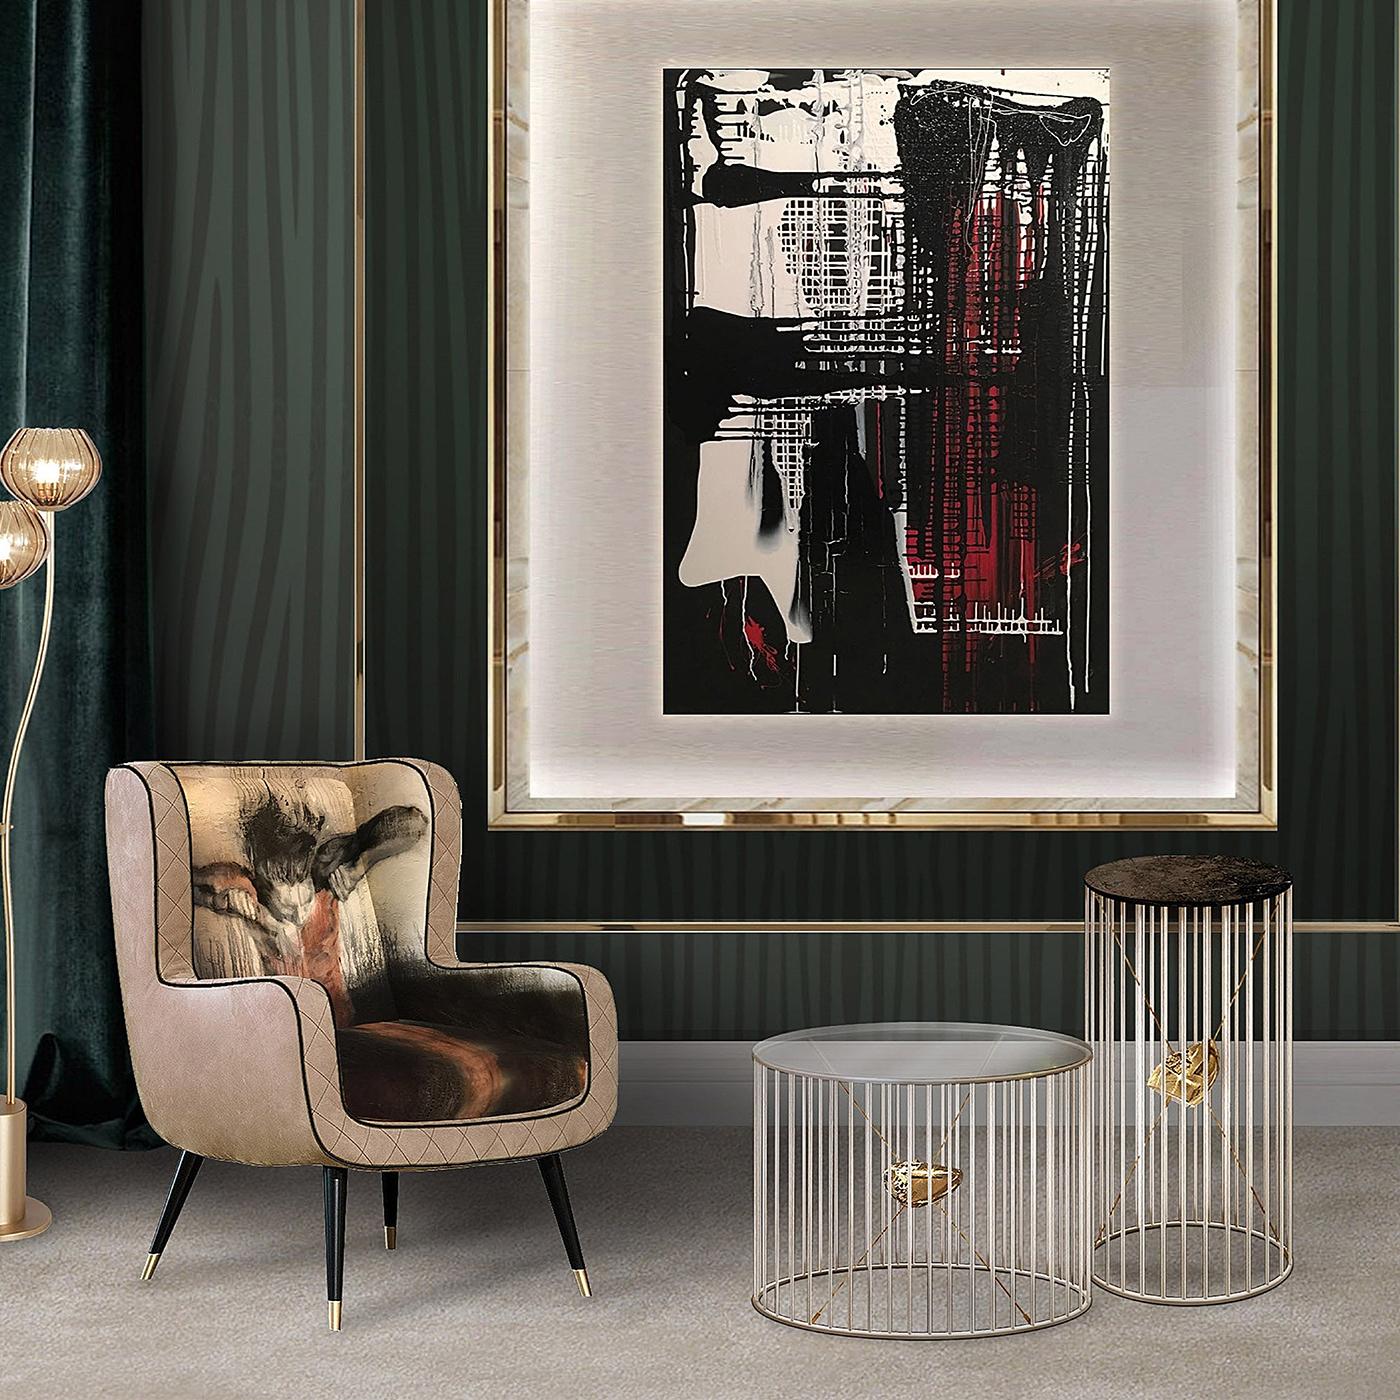 A splendid piece to pair with the Tyler Tall Side Table, this piece will add an accent of plush sophistication to both a private studio or living room. Made of nickel-finished brass, the structure features a ring-shaped based sustaining a